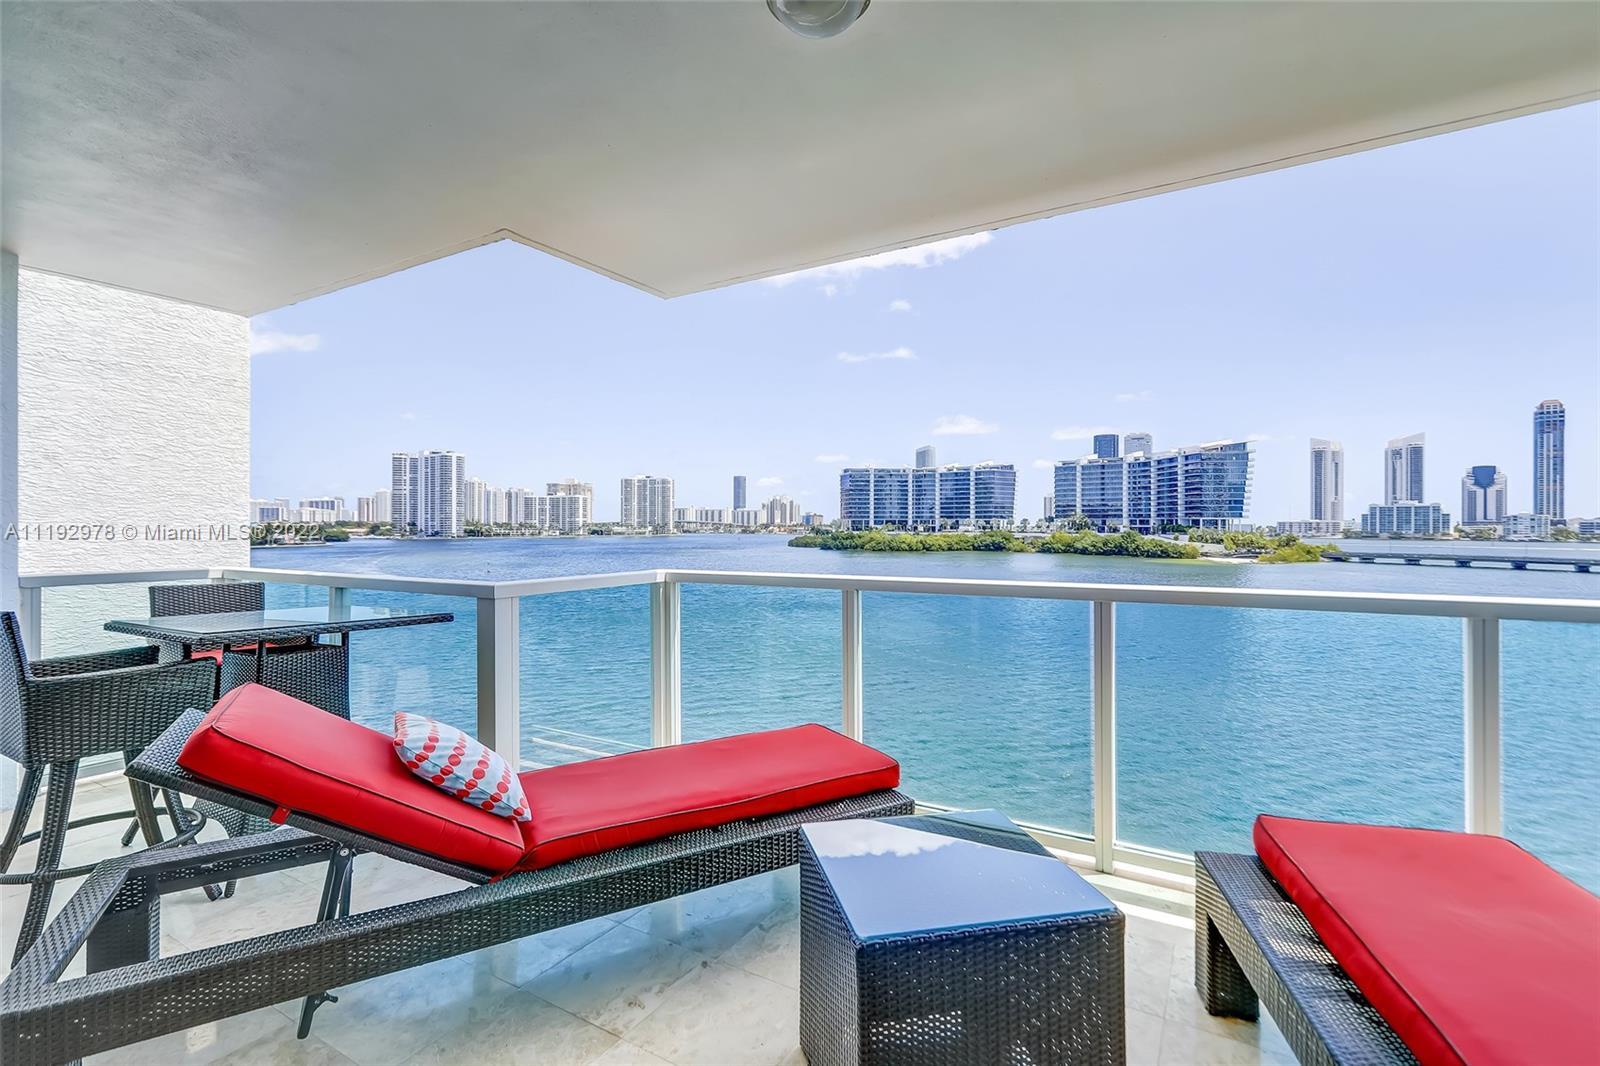 RARELY AVAILABLE 2 BED 2.5 BATHS PLUS DEN IN THE HIGHLY DESIRABLE 5 STAR PENINSULA CONDOMINIUM. FANT